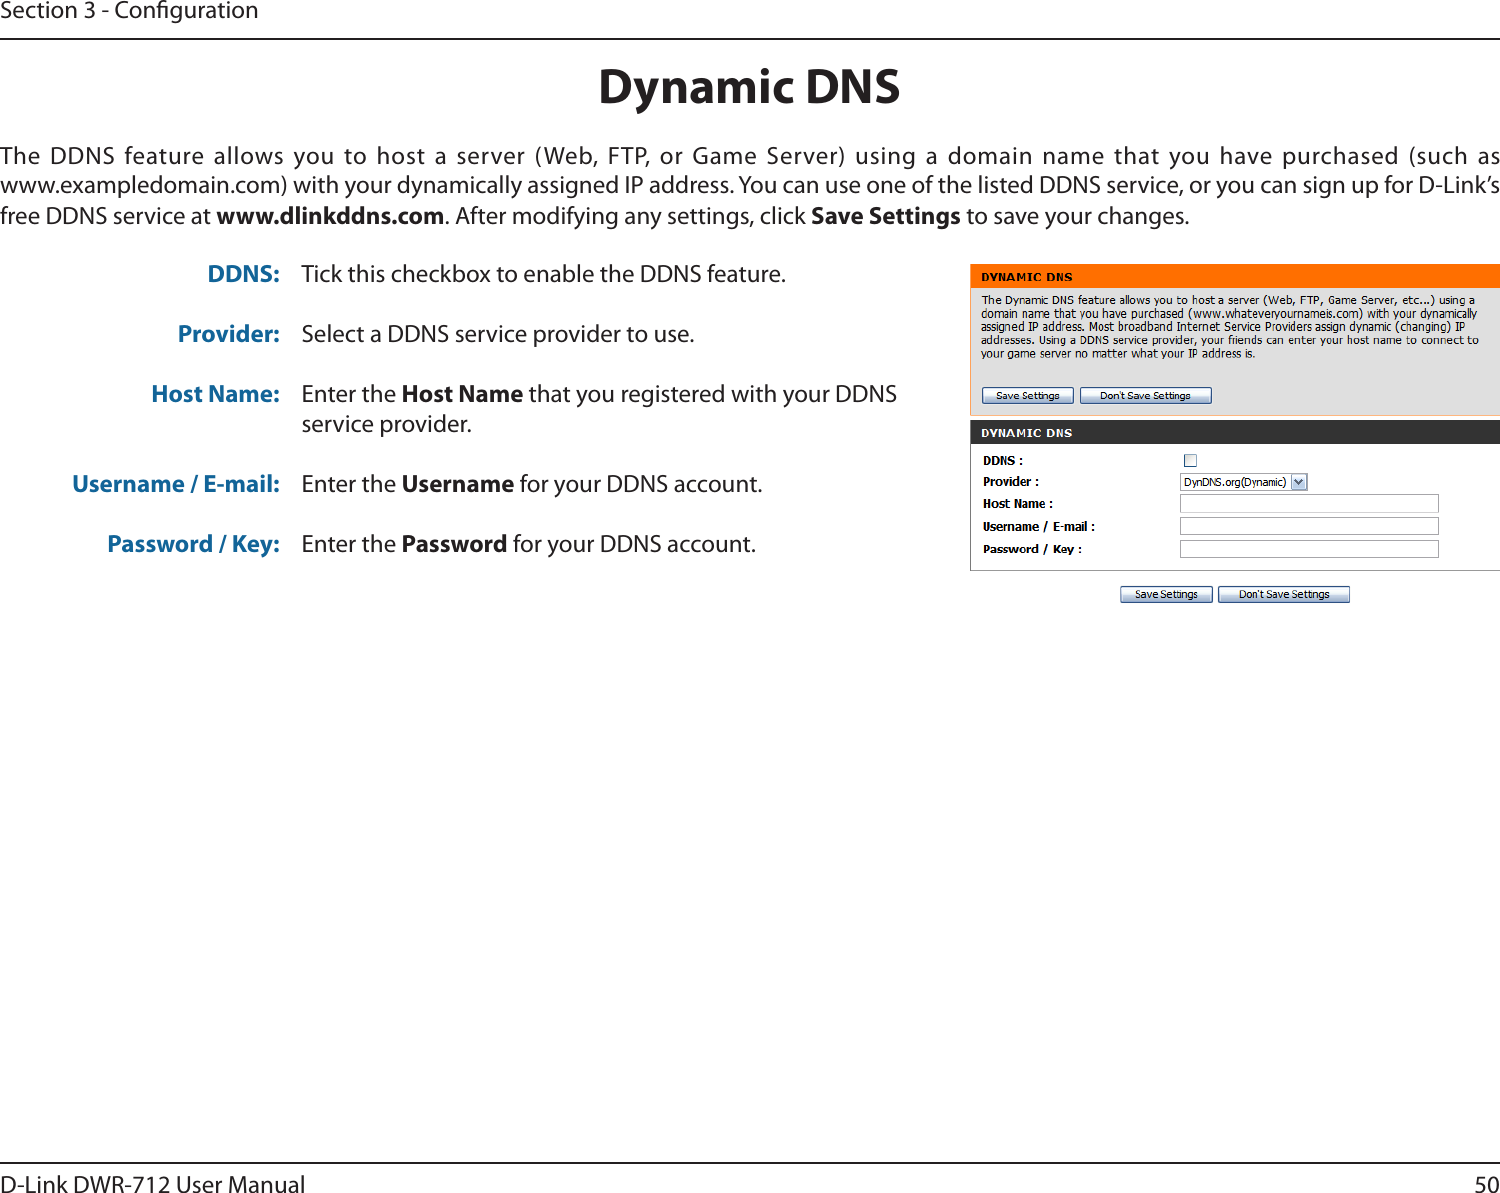 50D-Link DWR-712 User ManualSection 3 - CongurationDynamic DNSTick this checkbox to enable the DDNS feature.Select a DDNS service provider to use.Enter the Host Name that you registered with your DDNS service provider.Enter the Username for your DDNS account.Enter the Password for your DDNS account.The DDNS feature allows you to host a server (Web, FTP, or Game Server) using a domain name that you have purchased (such as  www.exampledomain.com) with your dynamically assigned IP address. You can use one of the listed DDNS service, or you can sign up for D-Link’s free DDNS service at www.dlinkddns.com. After modifying any settings, click Save Settings to save your changes.DDNS:Provider: Host Name:Username / E-mail: Password / Key: